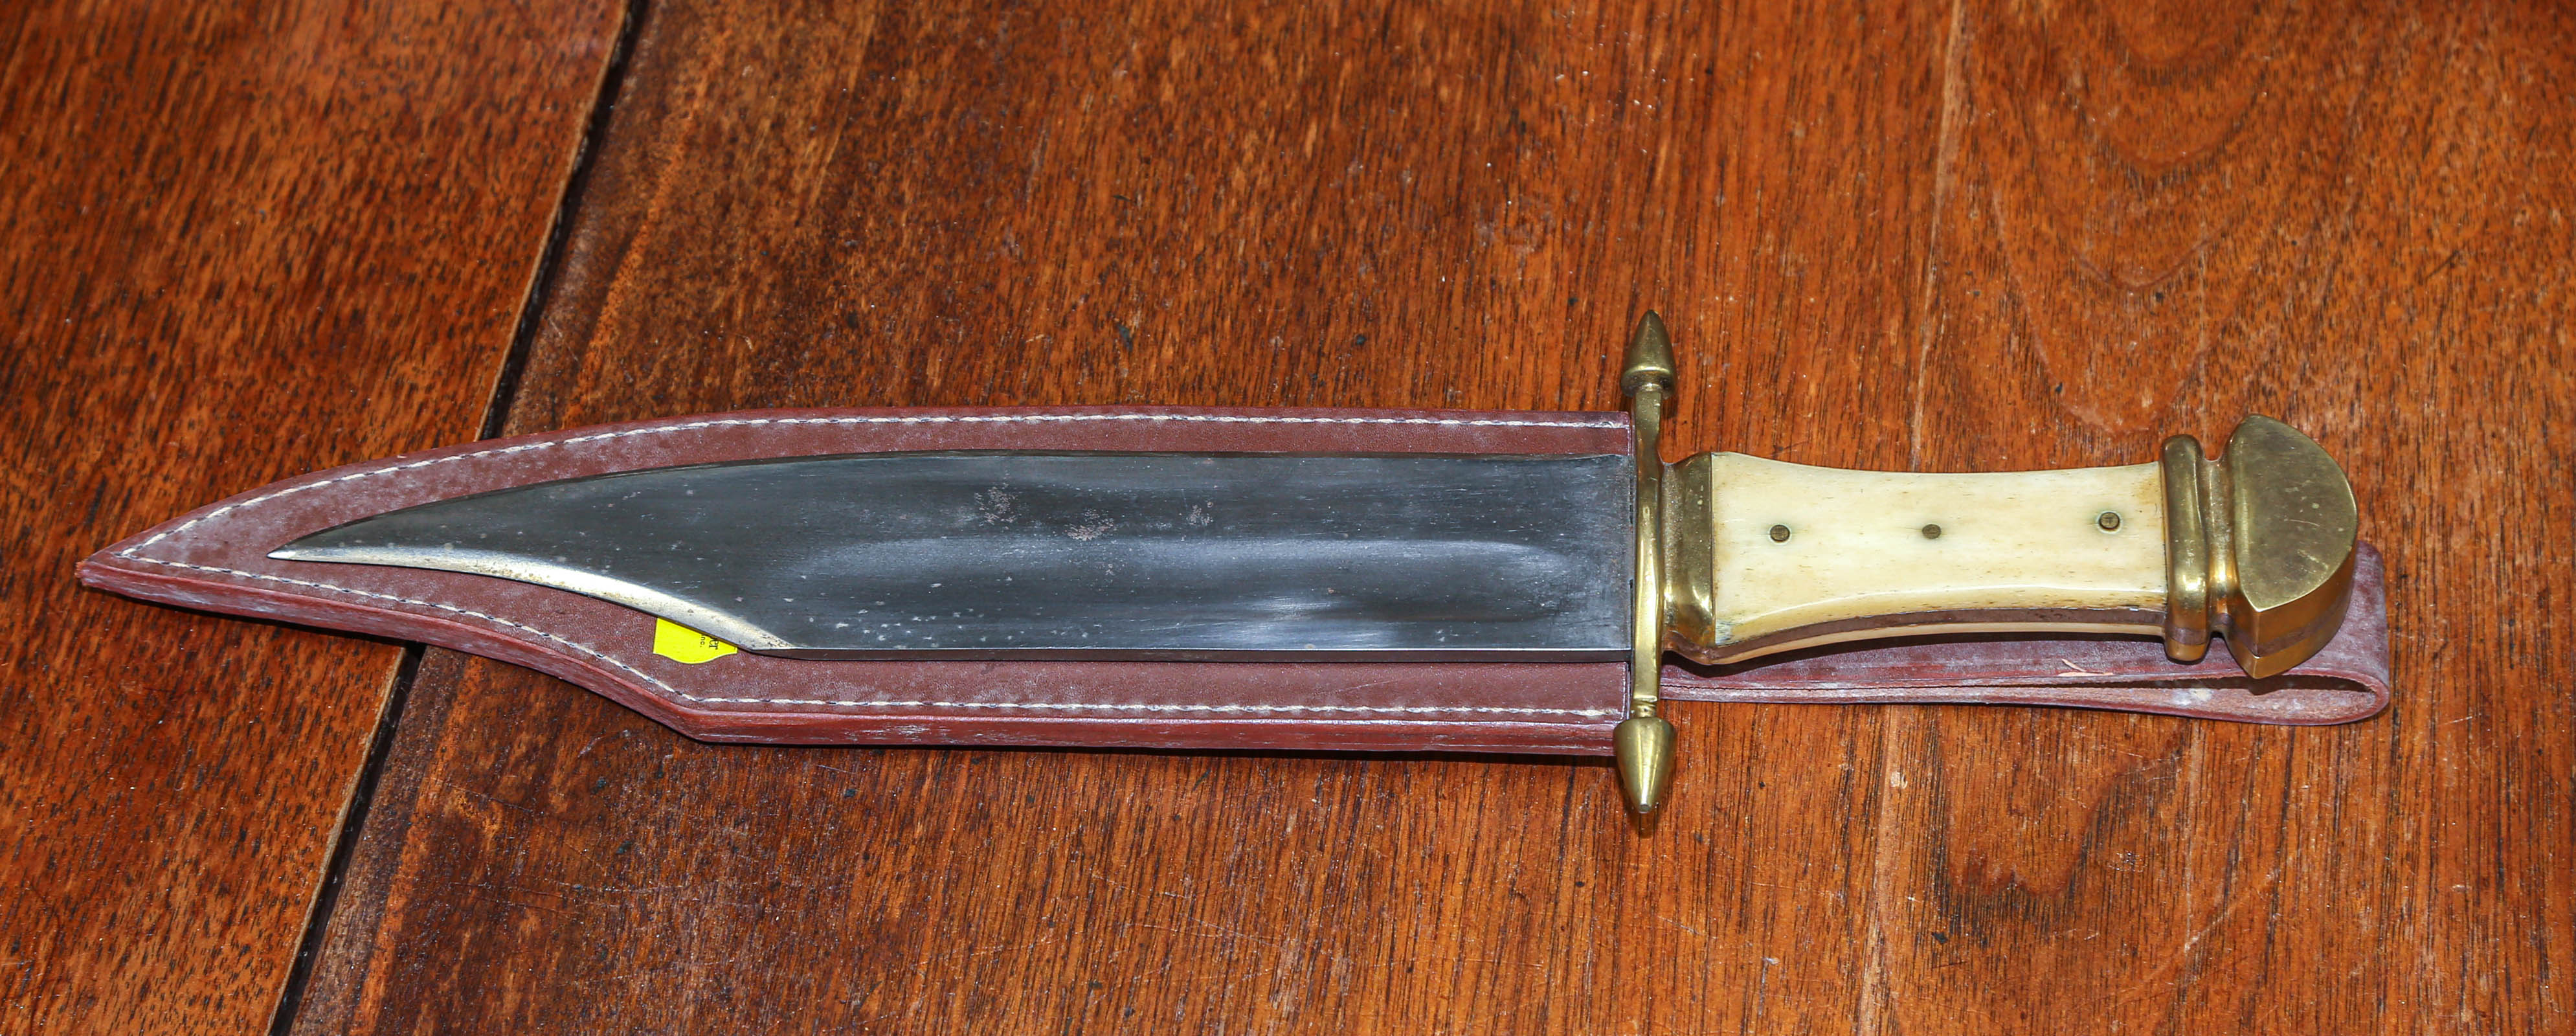 HAND-CRAFTED BOWIE KNIFE 20th century;